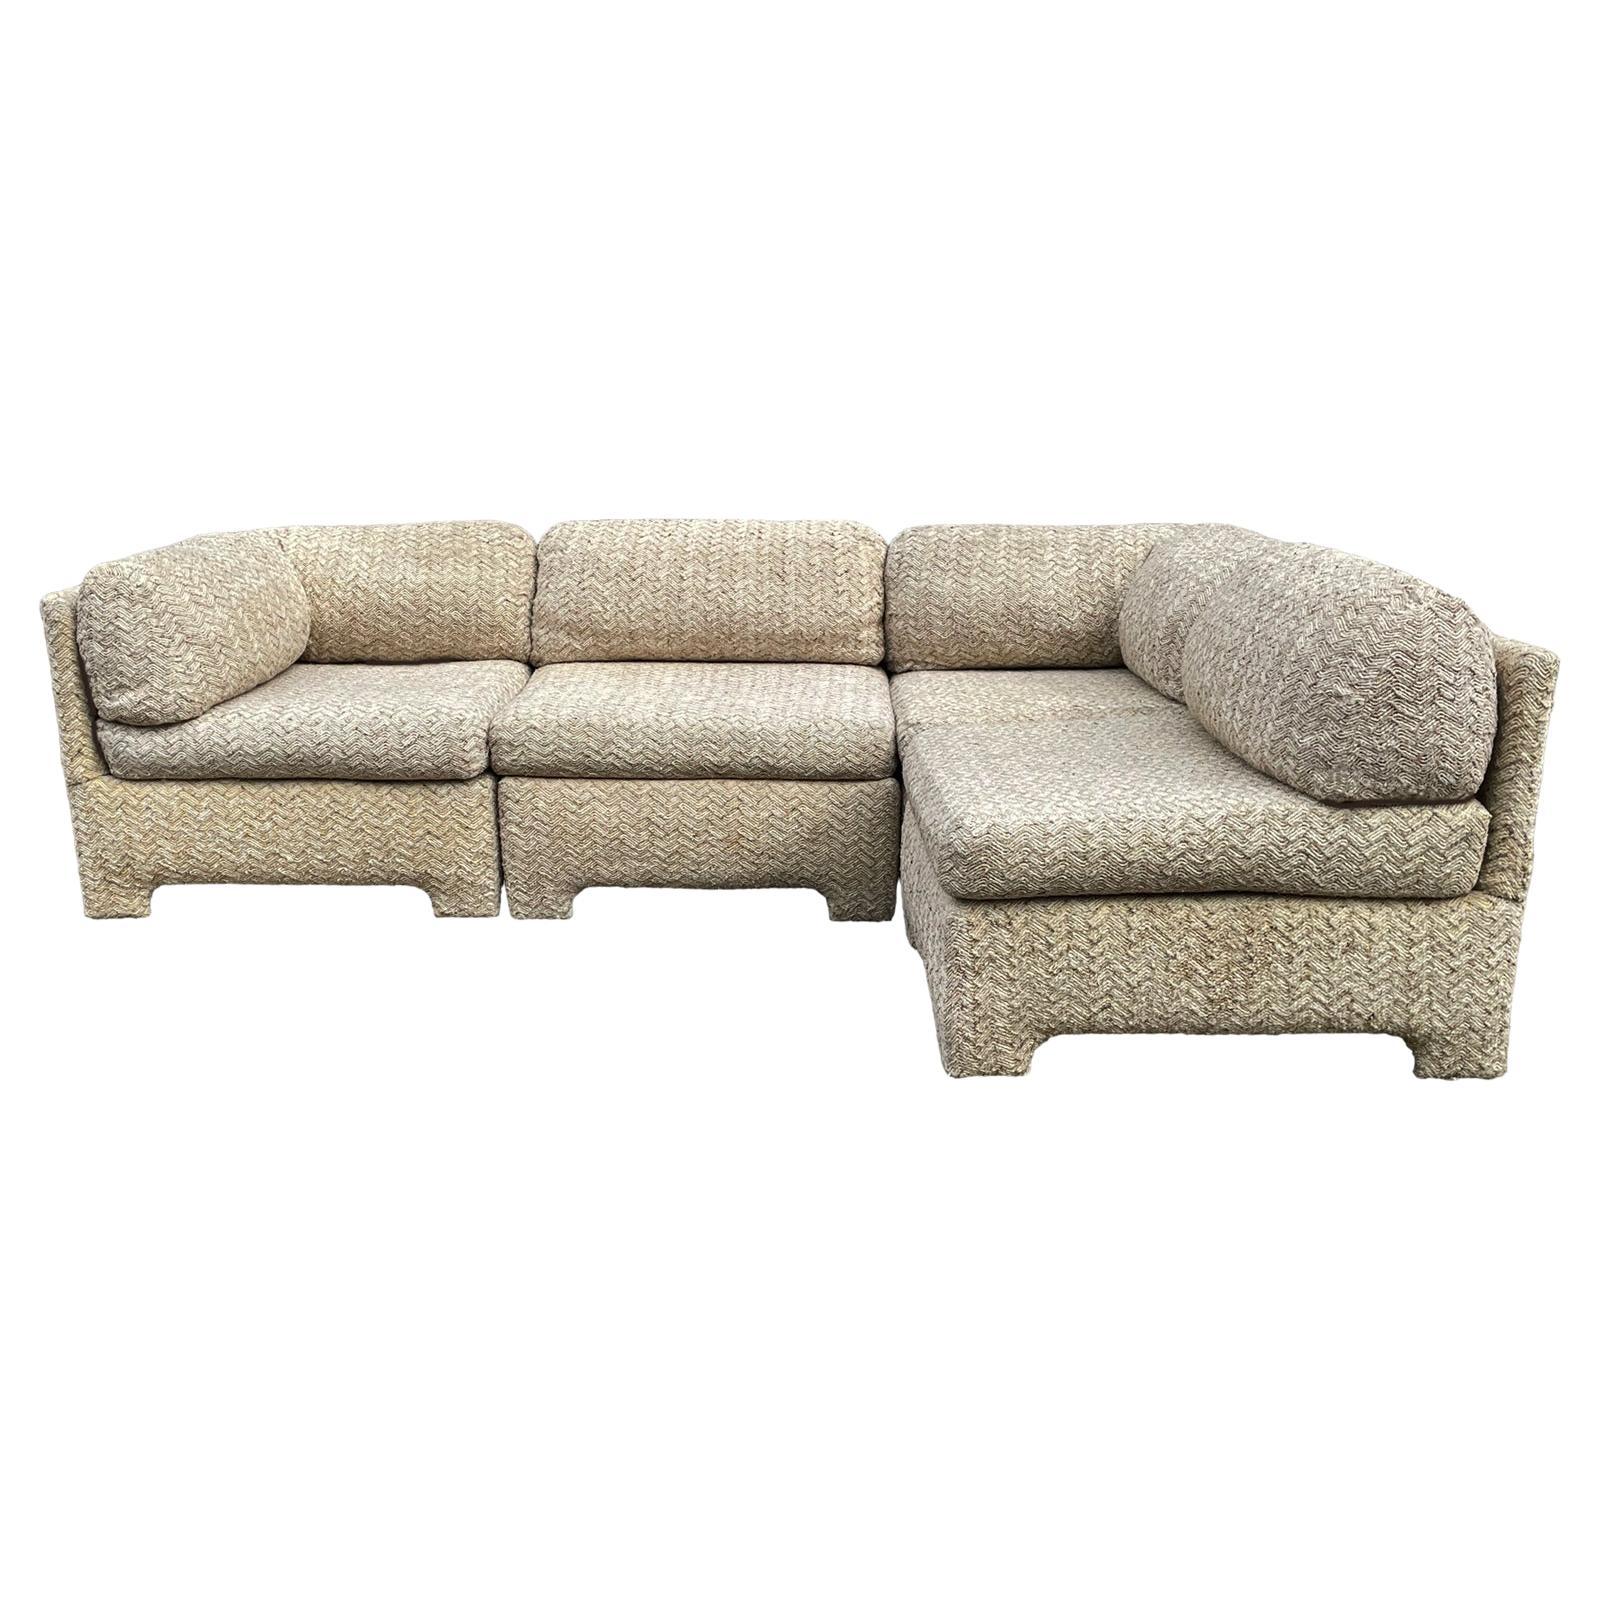 Small Scale Mid Century Modern Boxy Modular Parsons Style L Shaped Sofa  For Sale